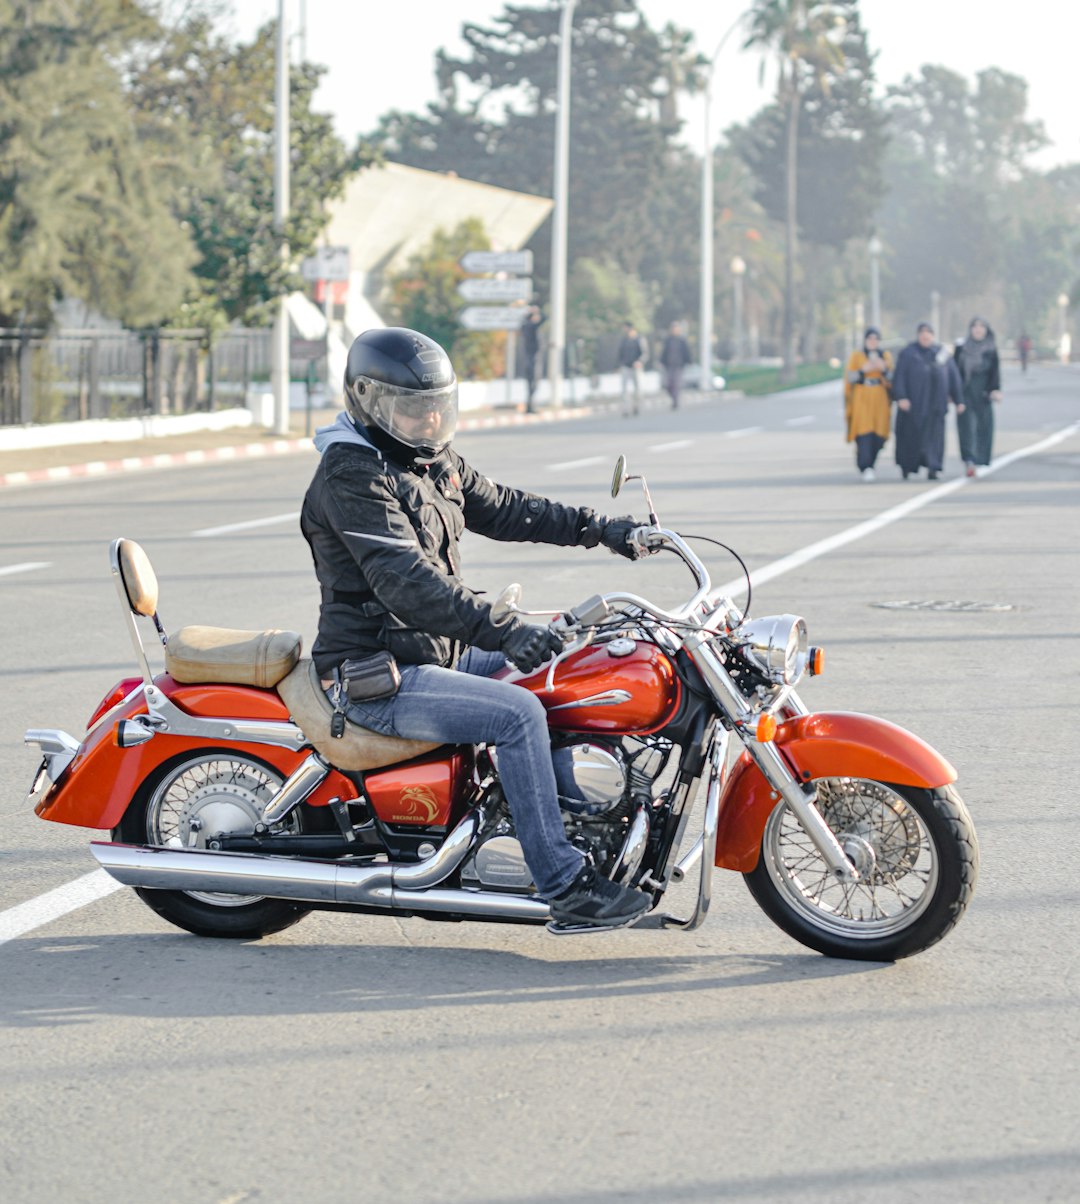 man riding motorcycle on road near people during day